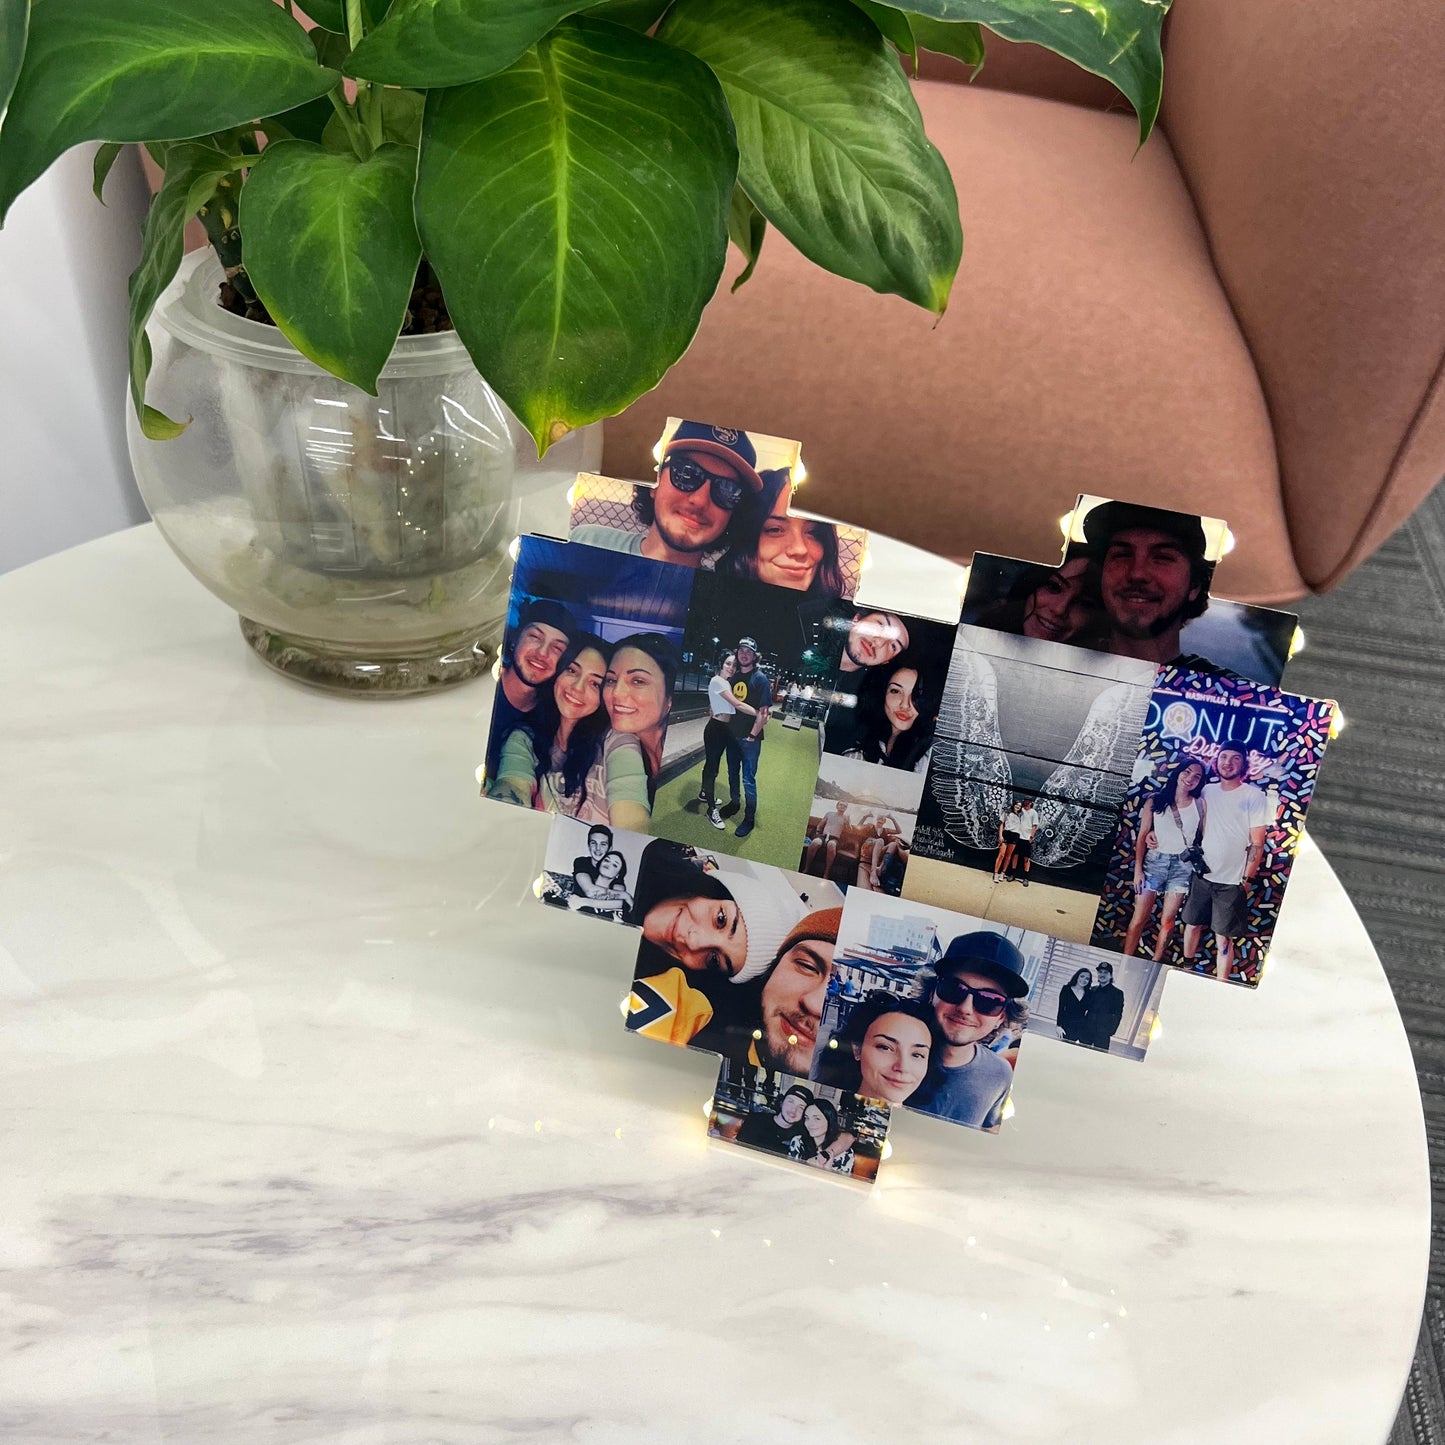 Custom Heart Shape Photo Collage Lamp with Your Photos